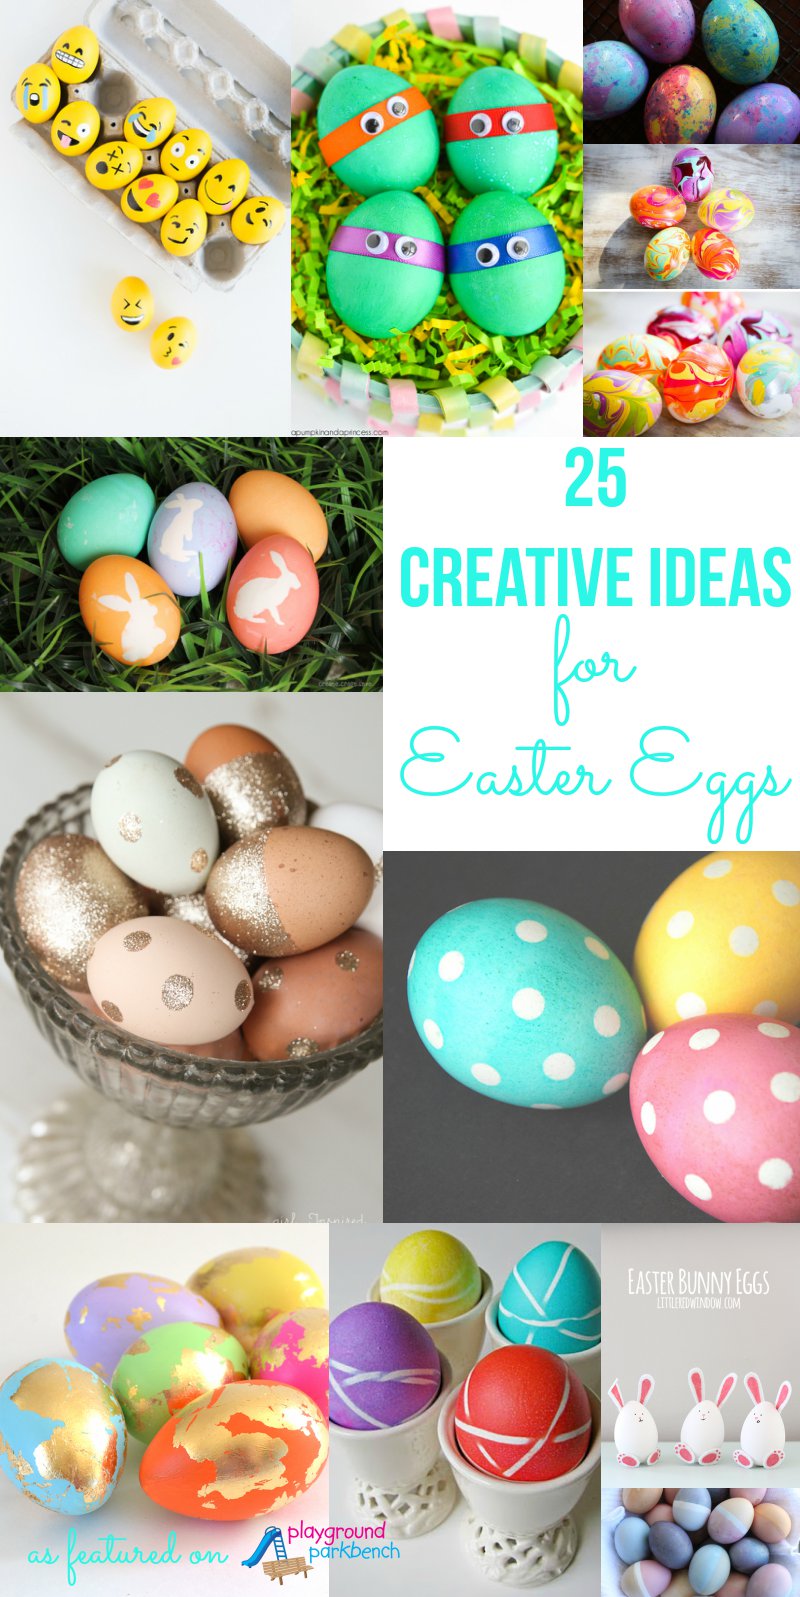 Decorating Easter eggs this holiday? These 25 creative ideas, techniques and processes will leave you with Easter eggs that look like true works of art (and they're easy too!) | Easter | Easter eggs | Crafts for Kids | Holiday |